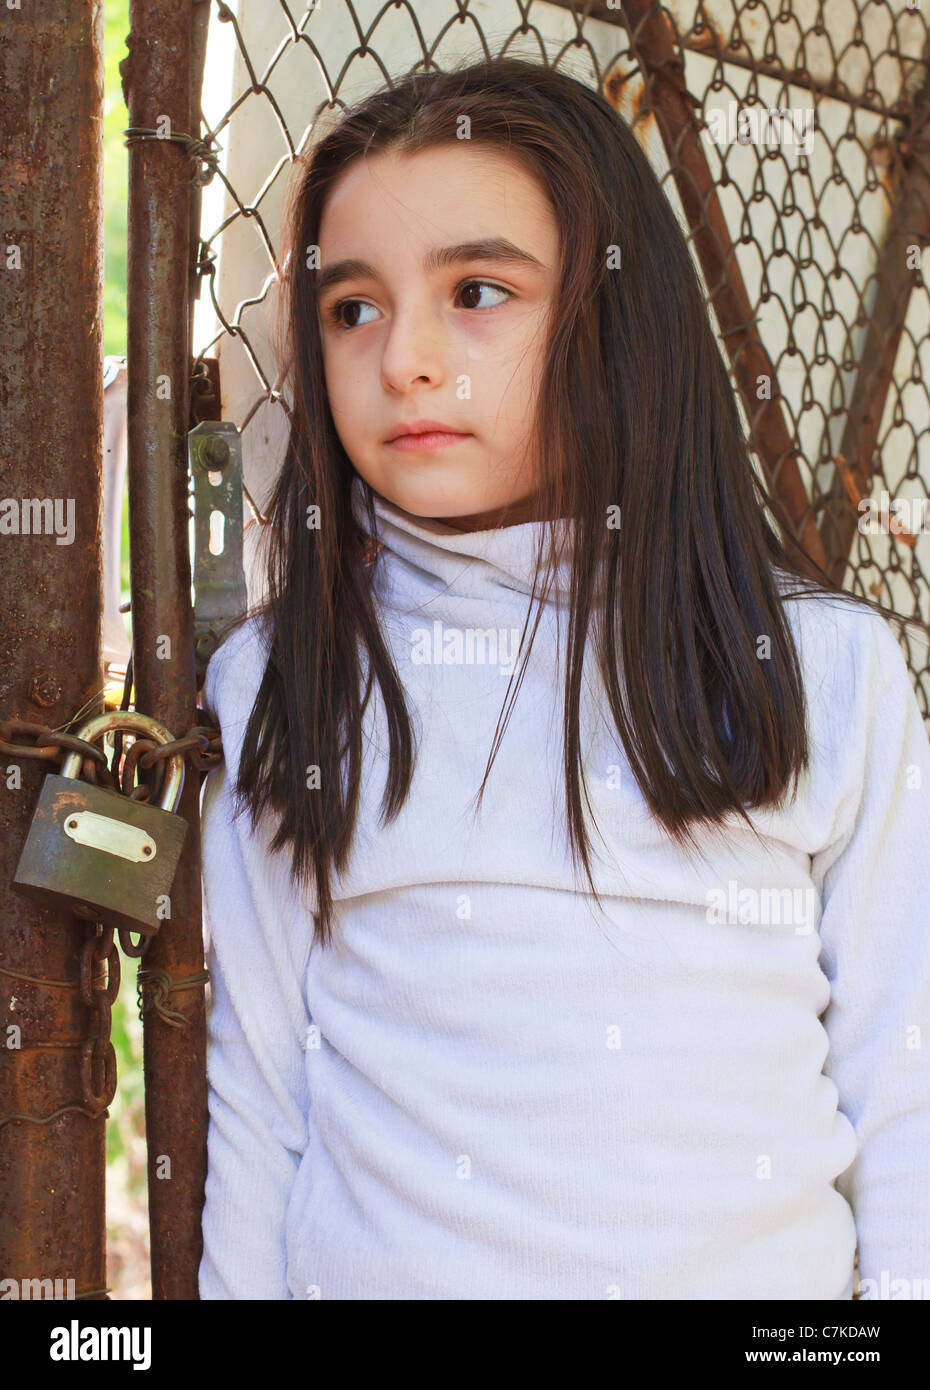 Sad and scared little girl in front of a wire fence Stock Photo